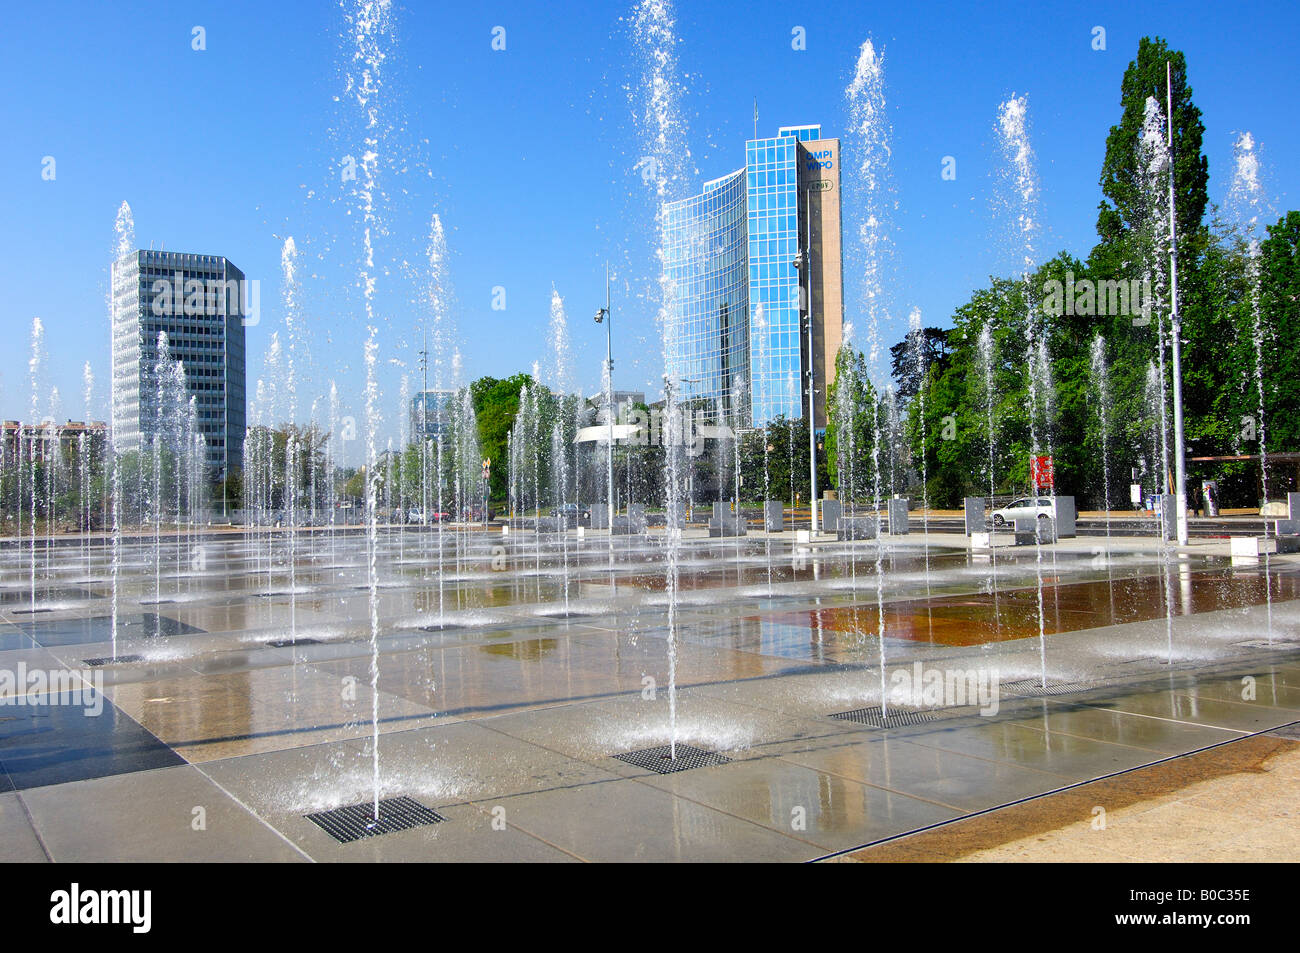 Fountains on the Place des Nations in Geneva, ITU Headquarters left, WIPO UPOV buildings on the right, Geneva Switzerland Stock Photo